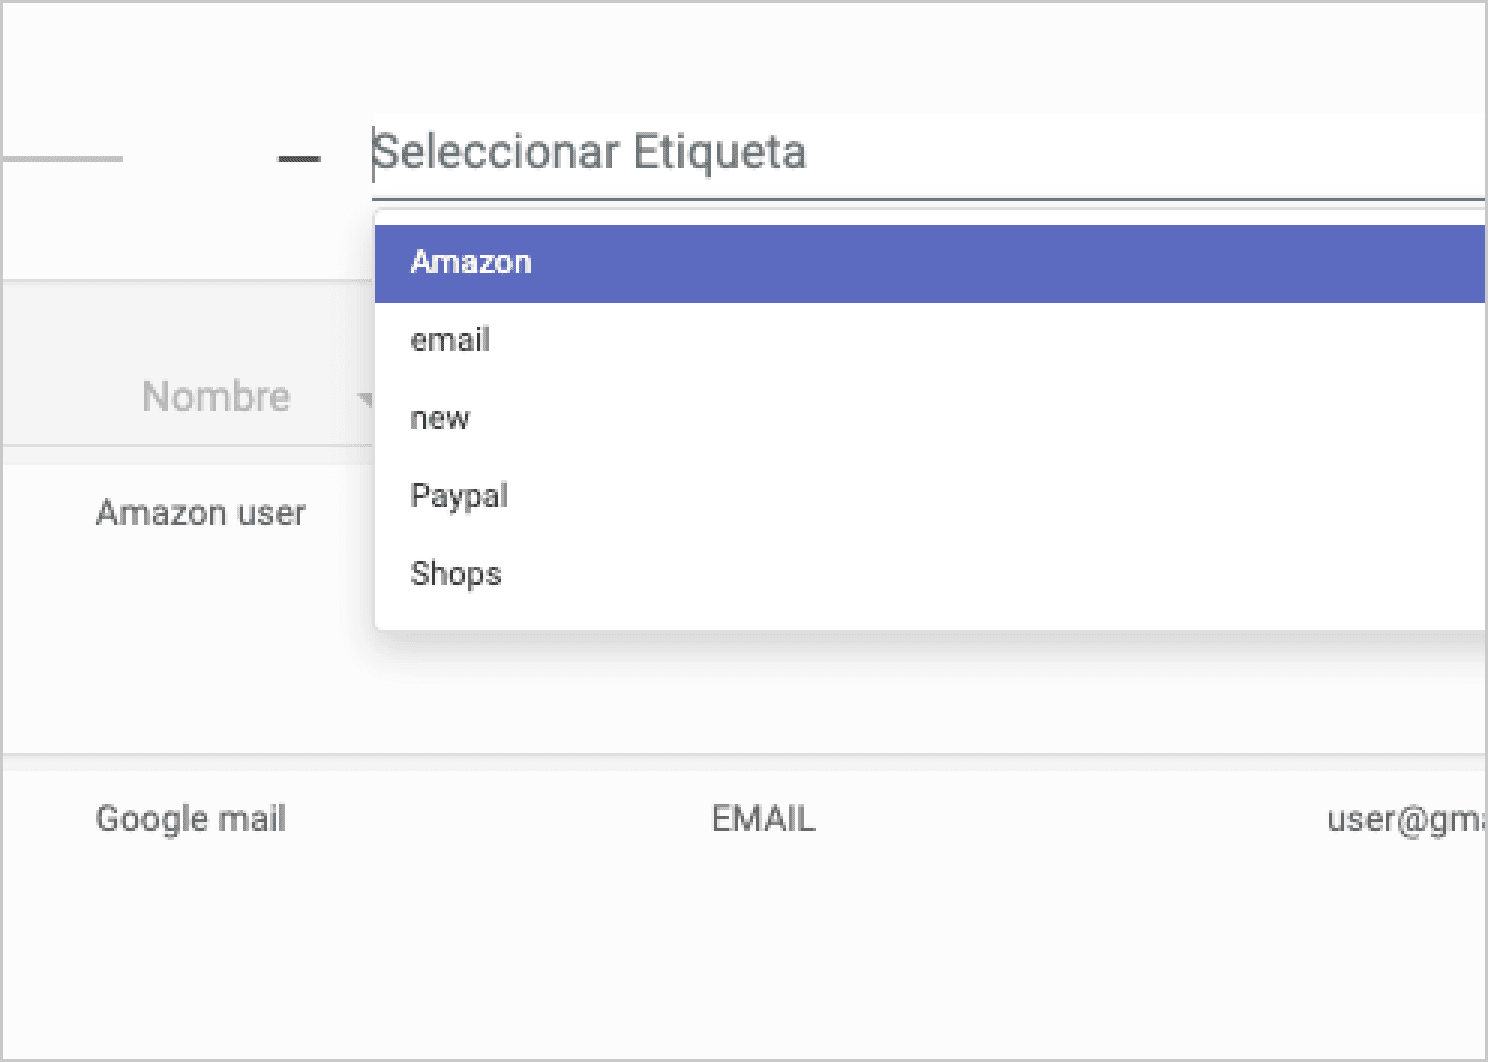 Filter passwords by label